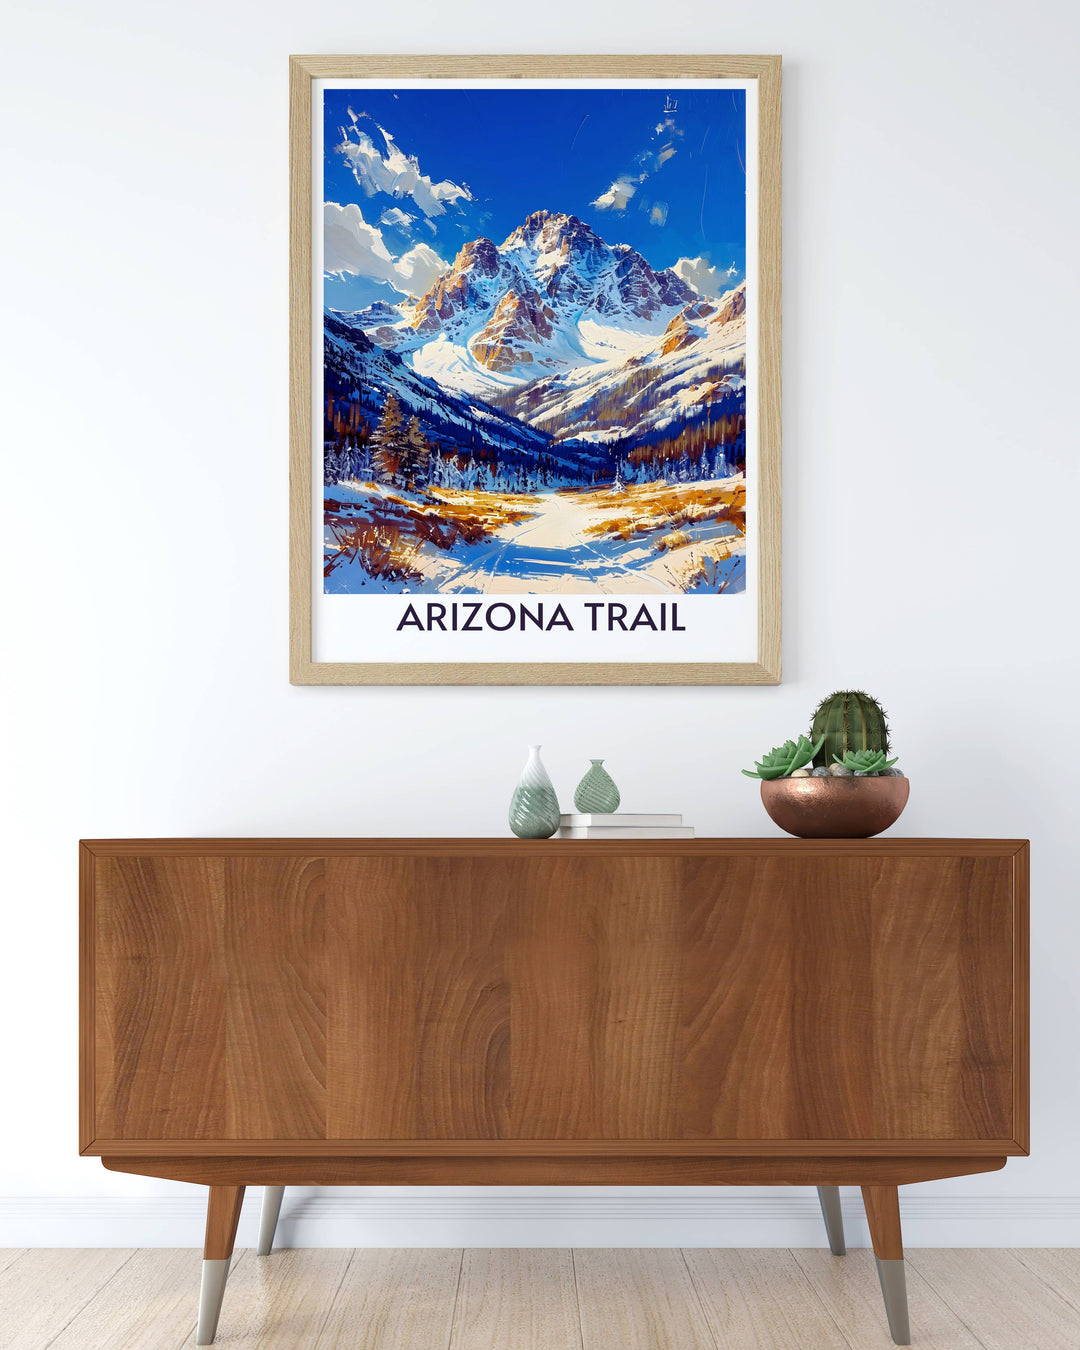 Grand Canyon print and San Francisco Peaks Park poster highlighting the natural wonders of the United States perfect for travel lovers and collectors of National Park art bringing vibrant and detailed scenes into your home.